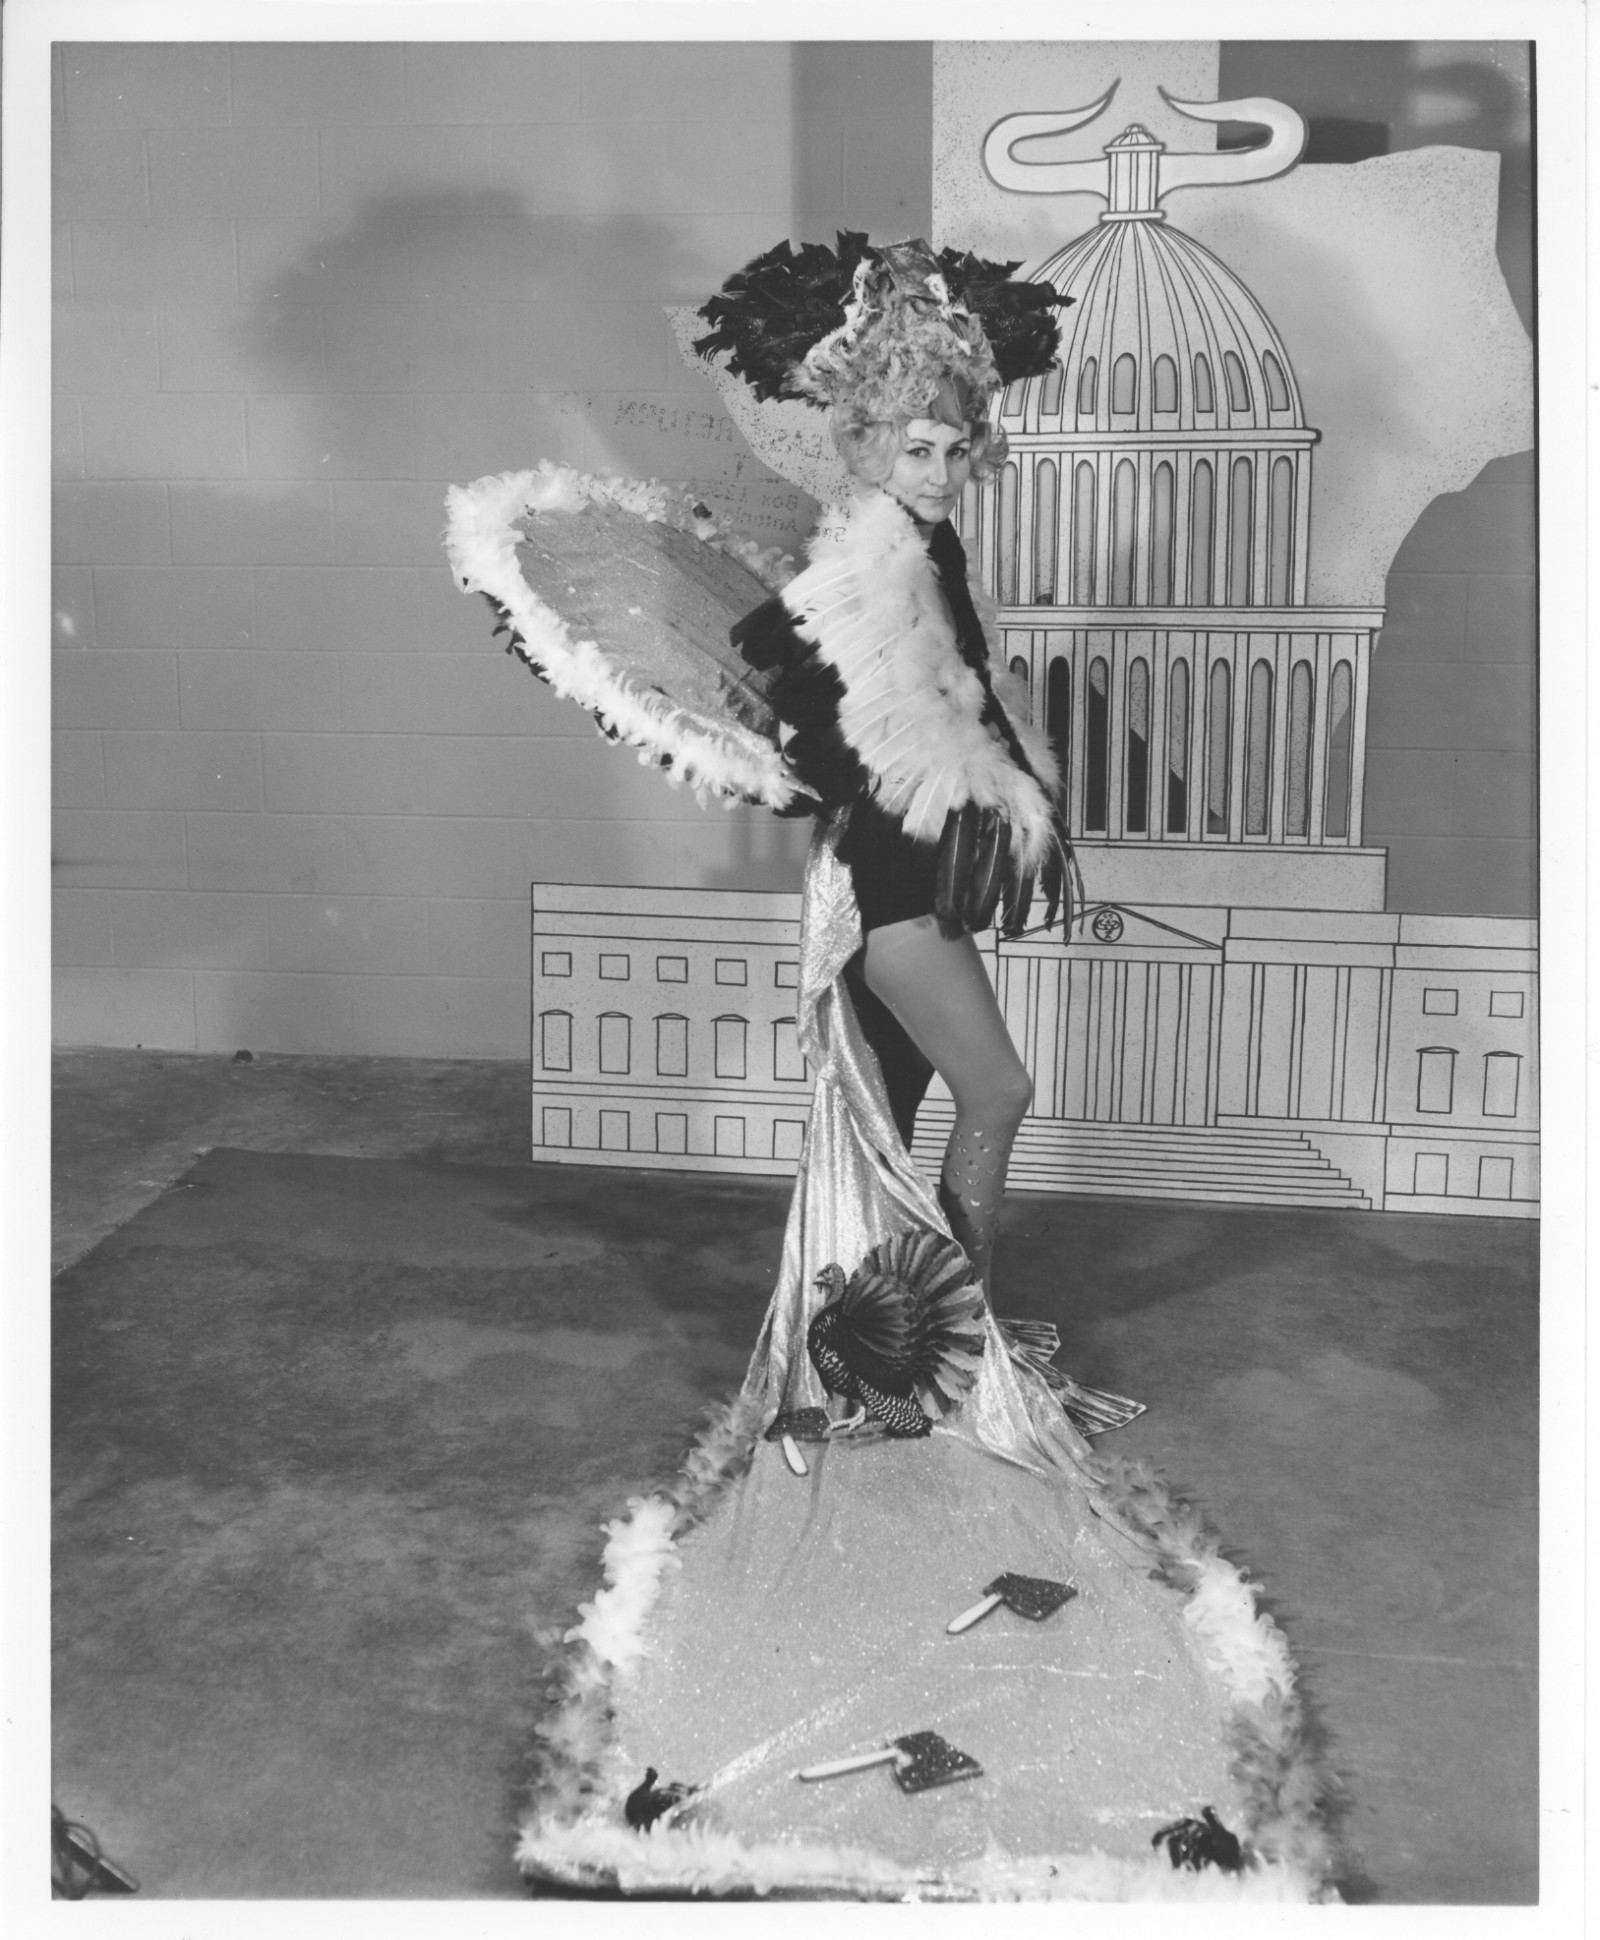 Aubrey Davenport as Duchess of the Turkey Trot, 1965. This costume demonstrates the trains that were common as a part of the costuming in the 1950s and 1960s . Courtesy of The Playhouse and the San Antonio Public Library Texana Collection.